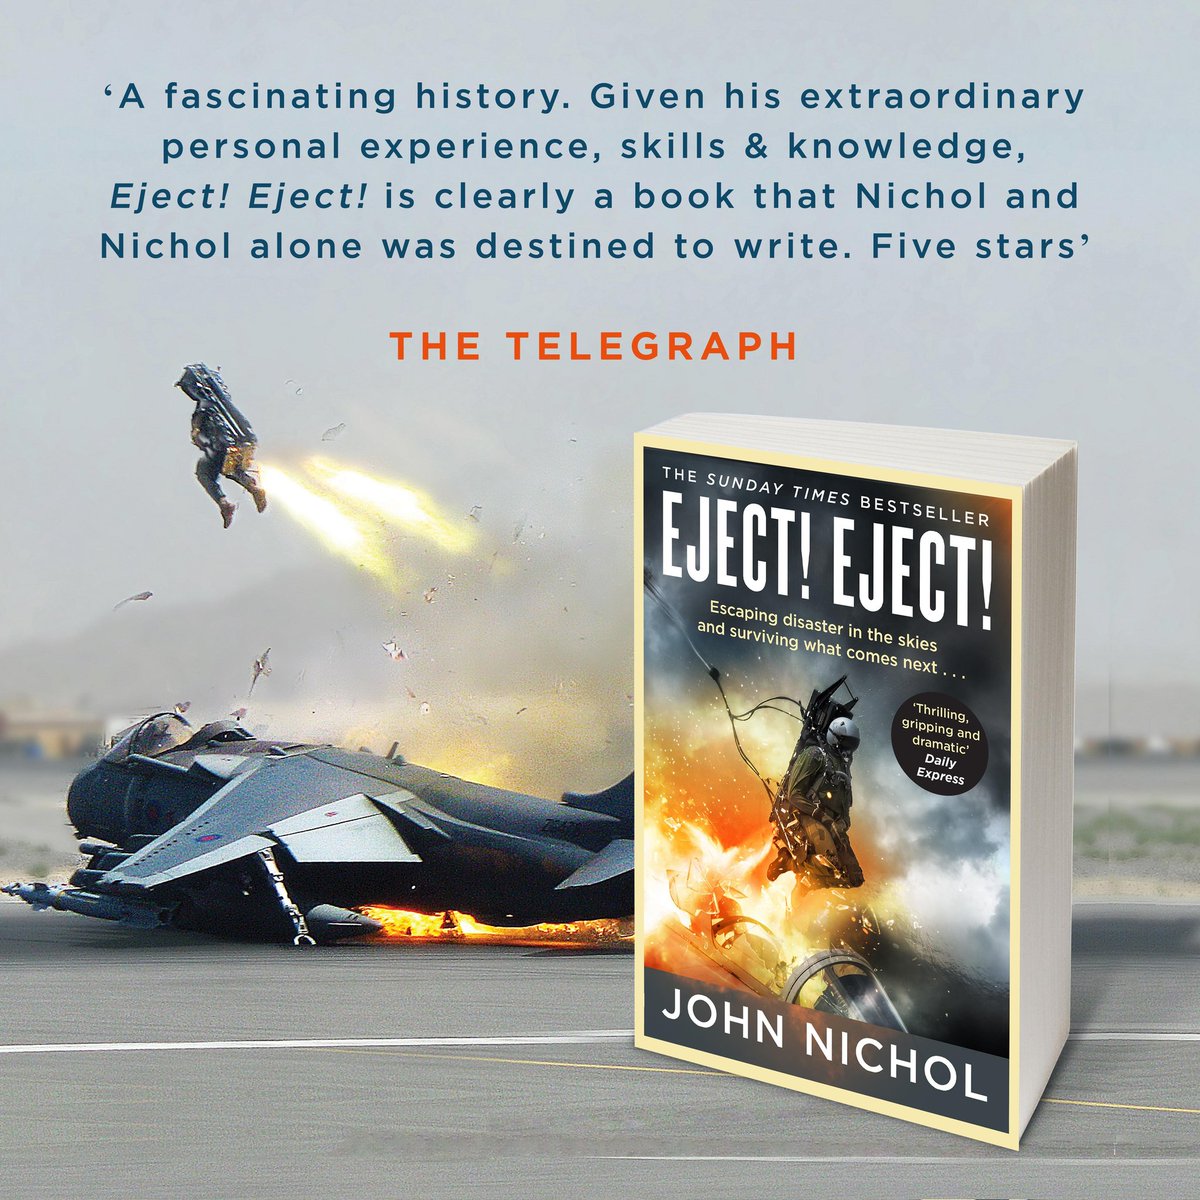 Wishing a very happy publication day to @JohnNicholRAF, whose Sunday Times bestselling #EjectEject publishes today in paperback ✈️